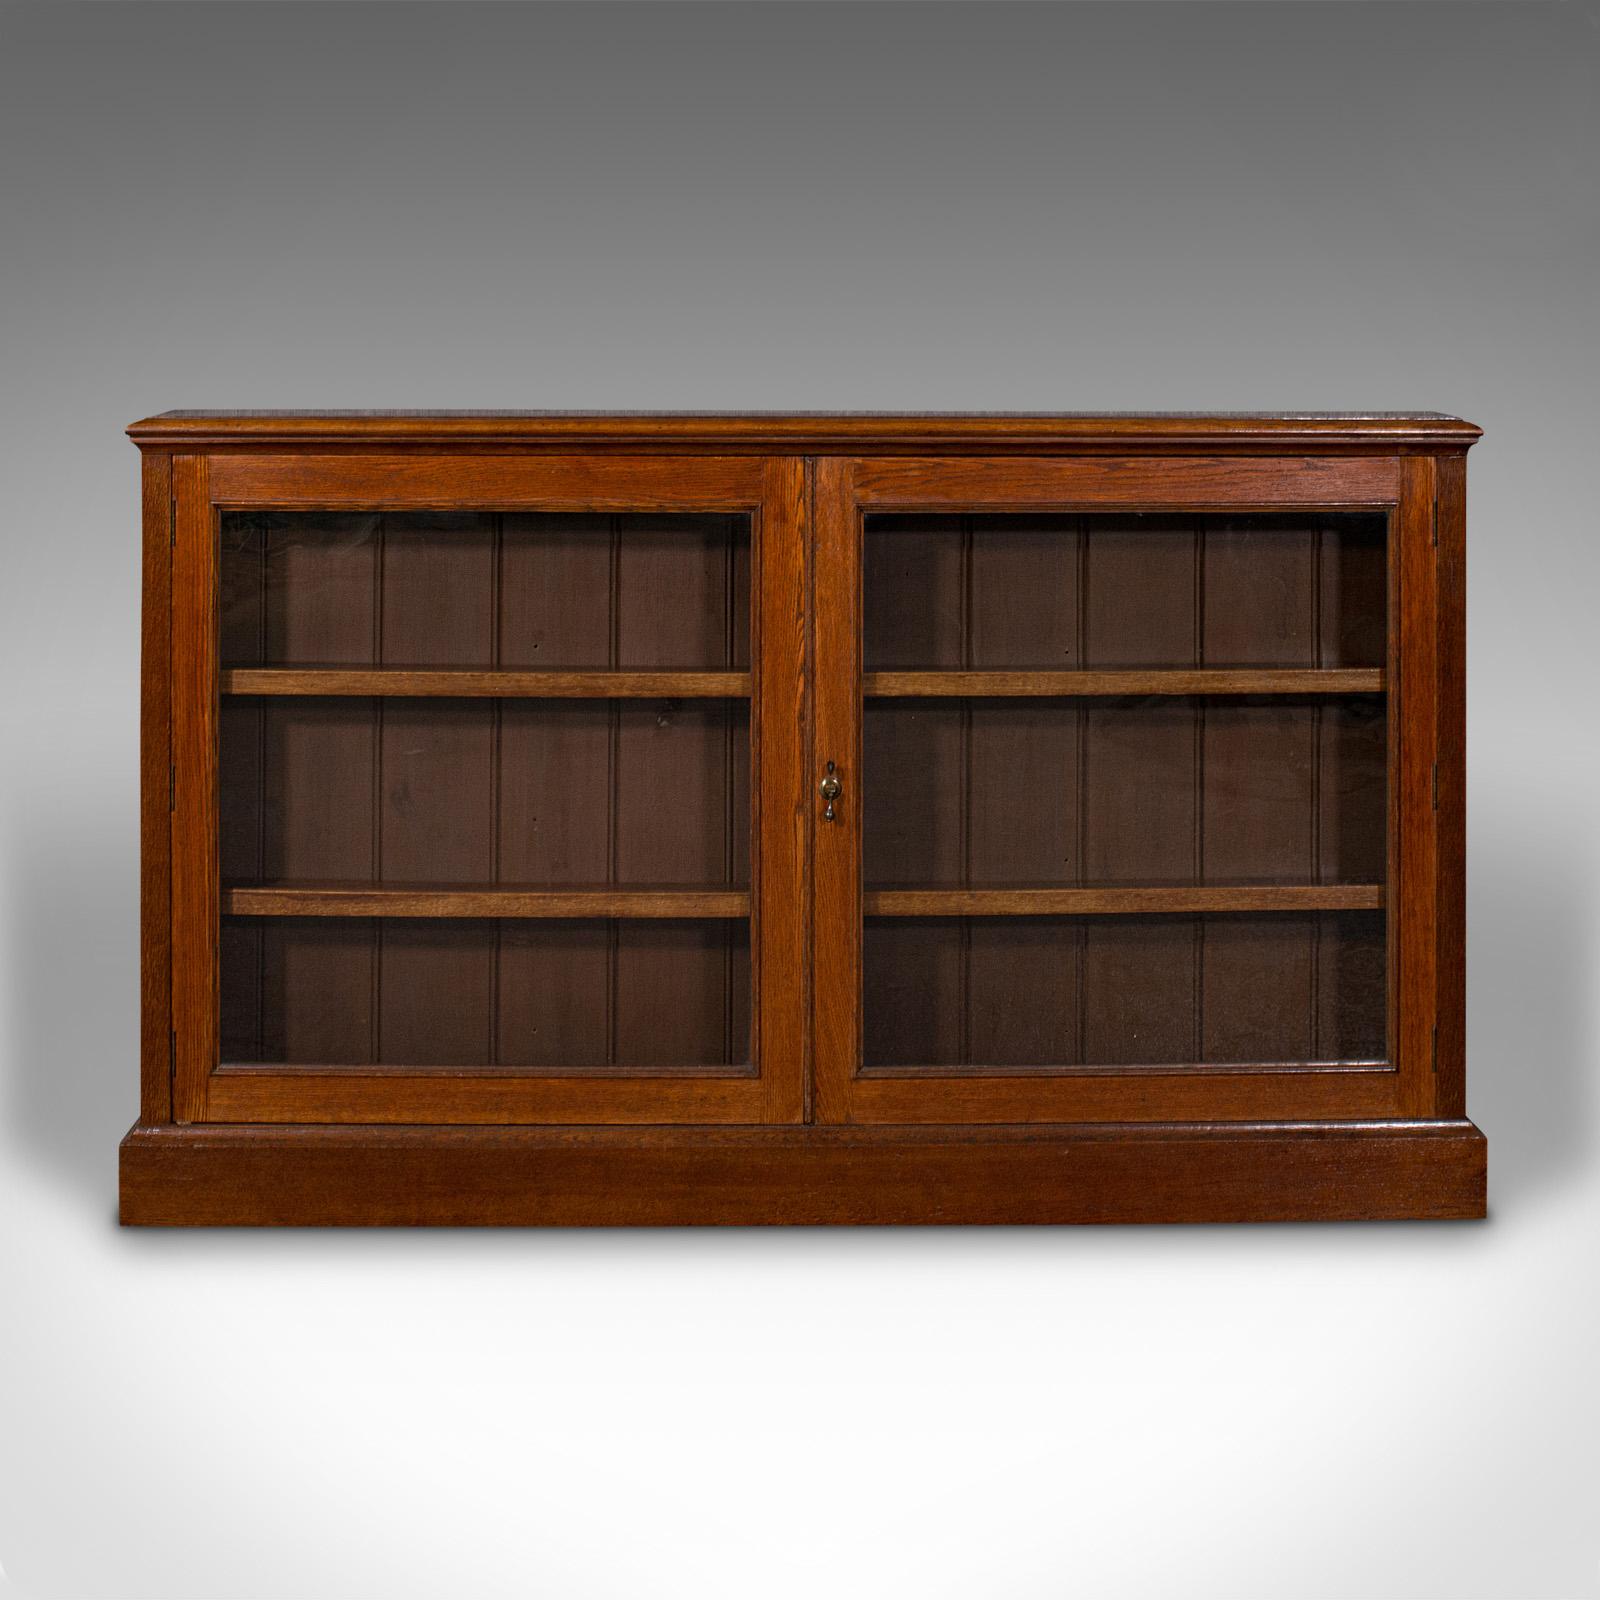 This is an antique wall standing display bookcase. An English, oak and glass library cabinet, dating to the Victorian period, circa 1870.

Appealing library showcase, the narrow profile usefully versatile
Displays a desirable aged patina and in